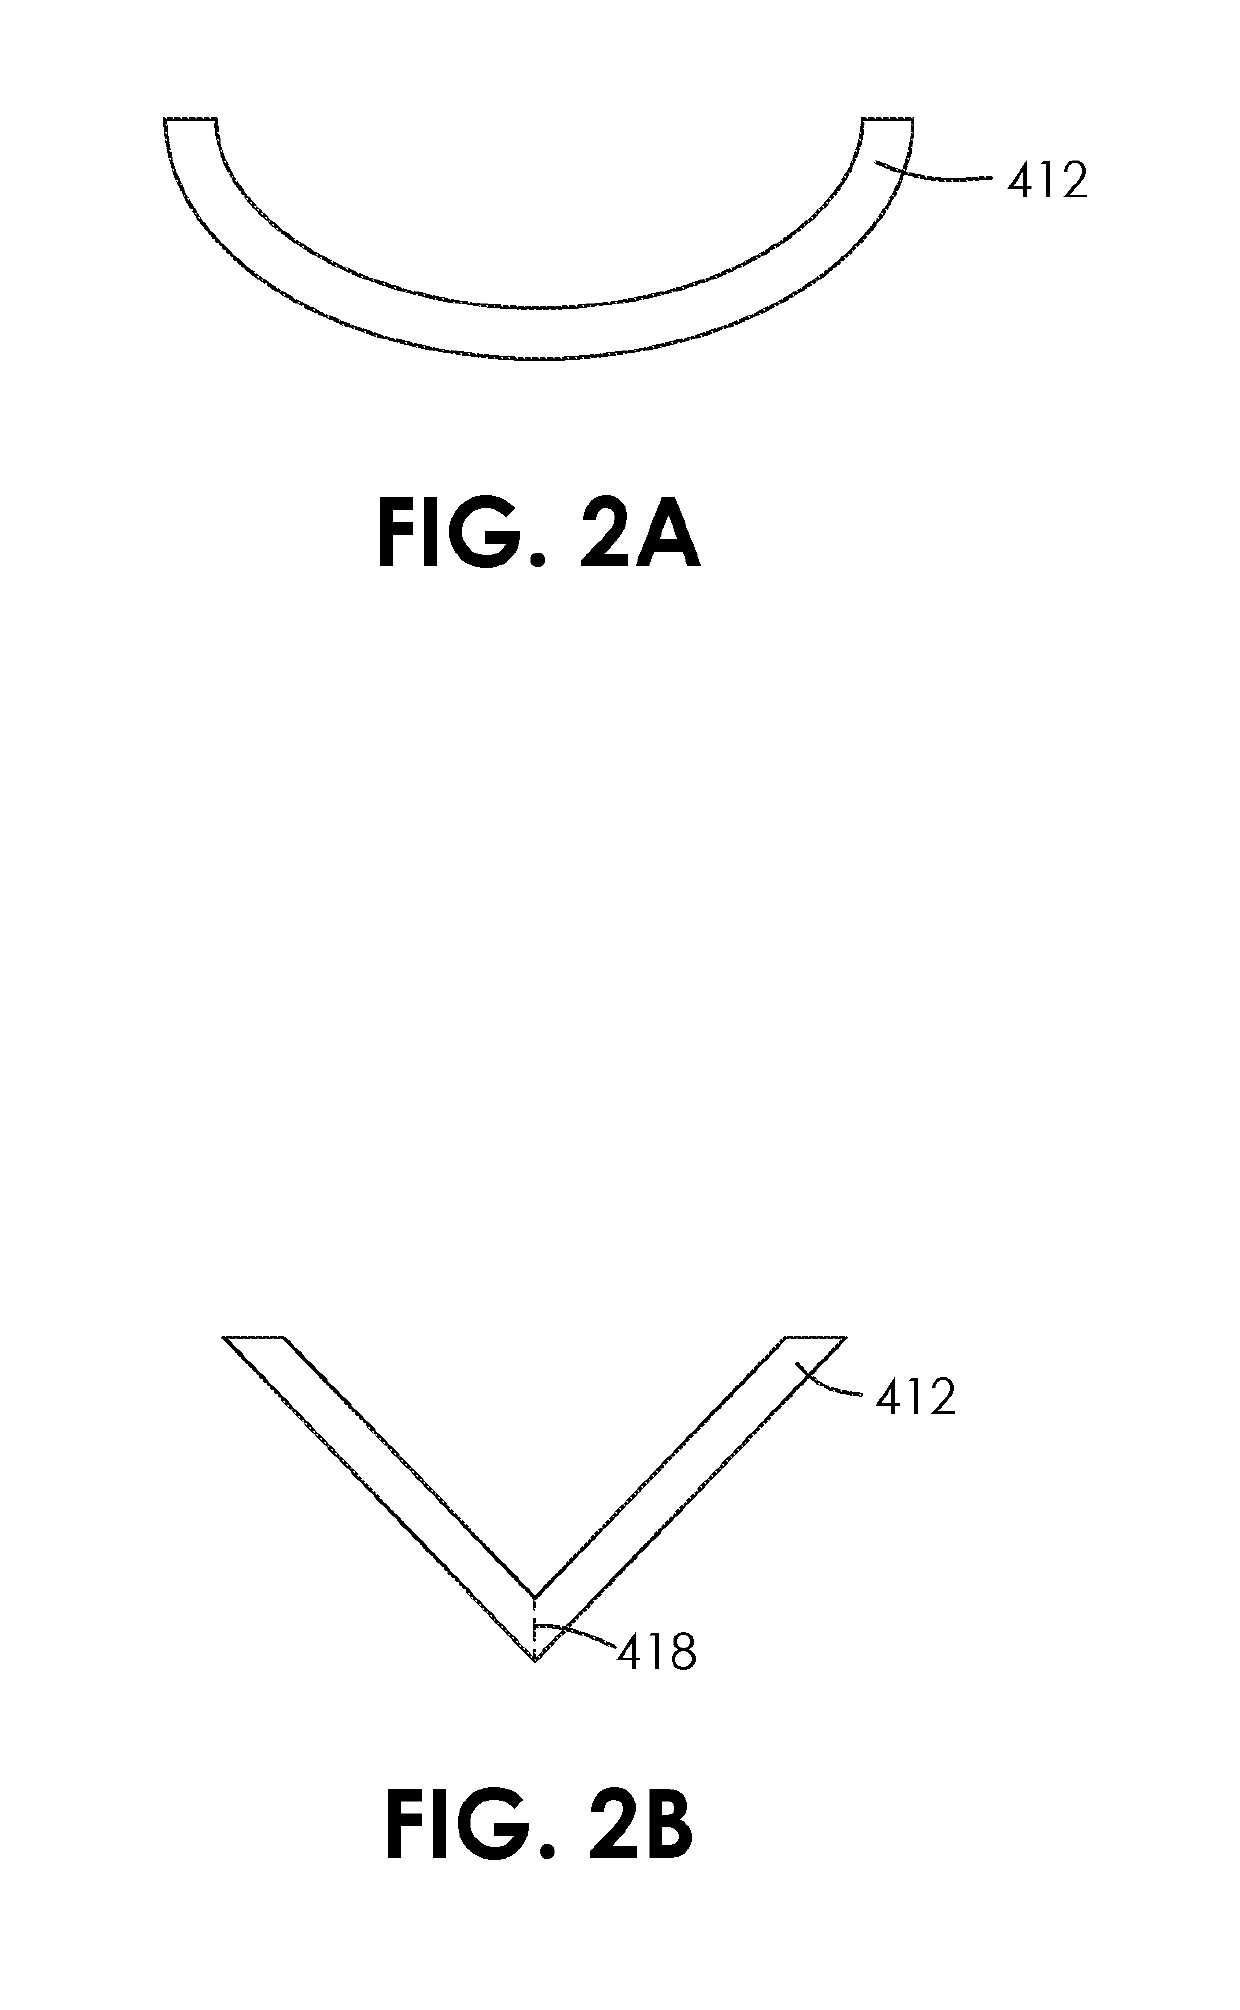 Combination of an organic substrate and organic formulation for use as a cutting board and storage container